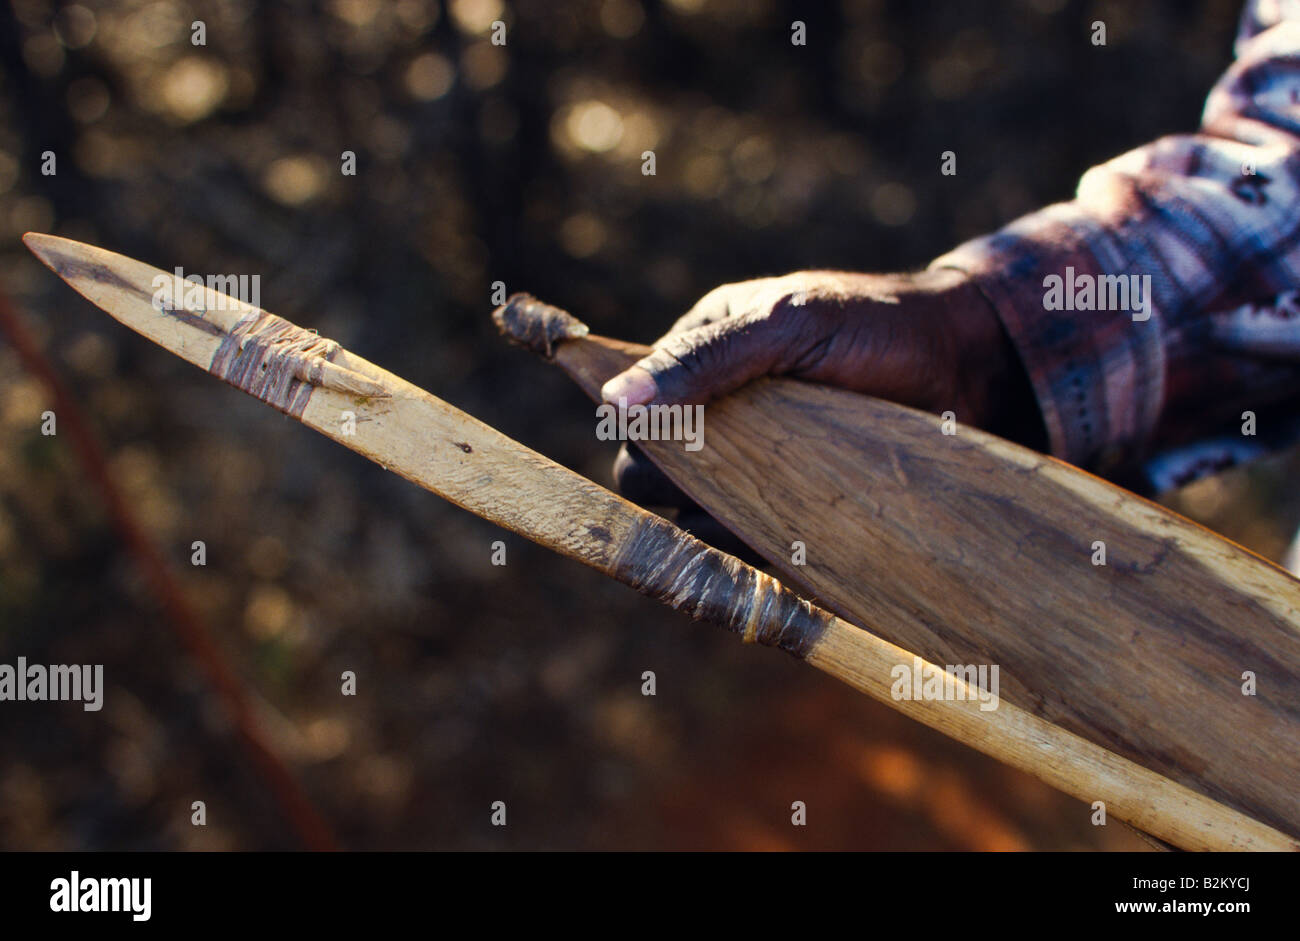 Aboriginal Hunting High Resolution Stock Photography and - Alamy